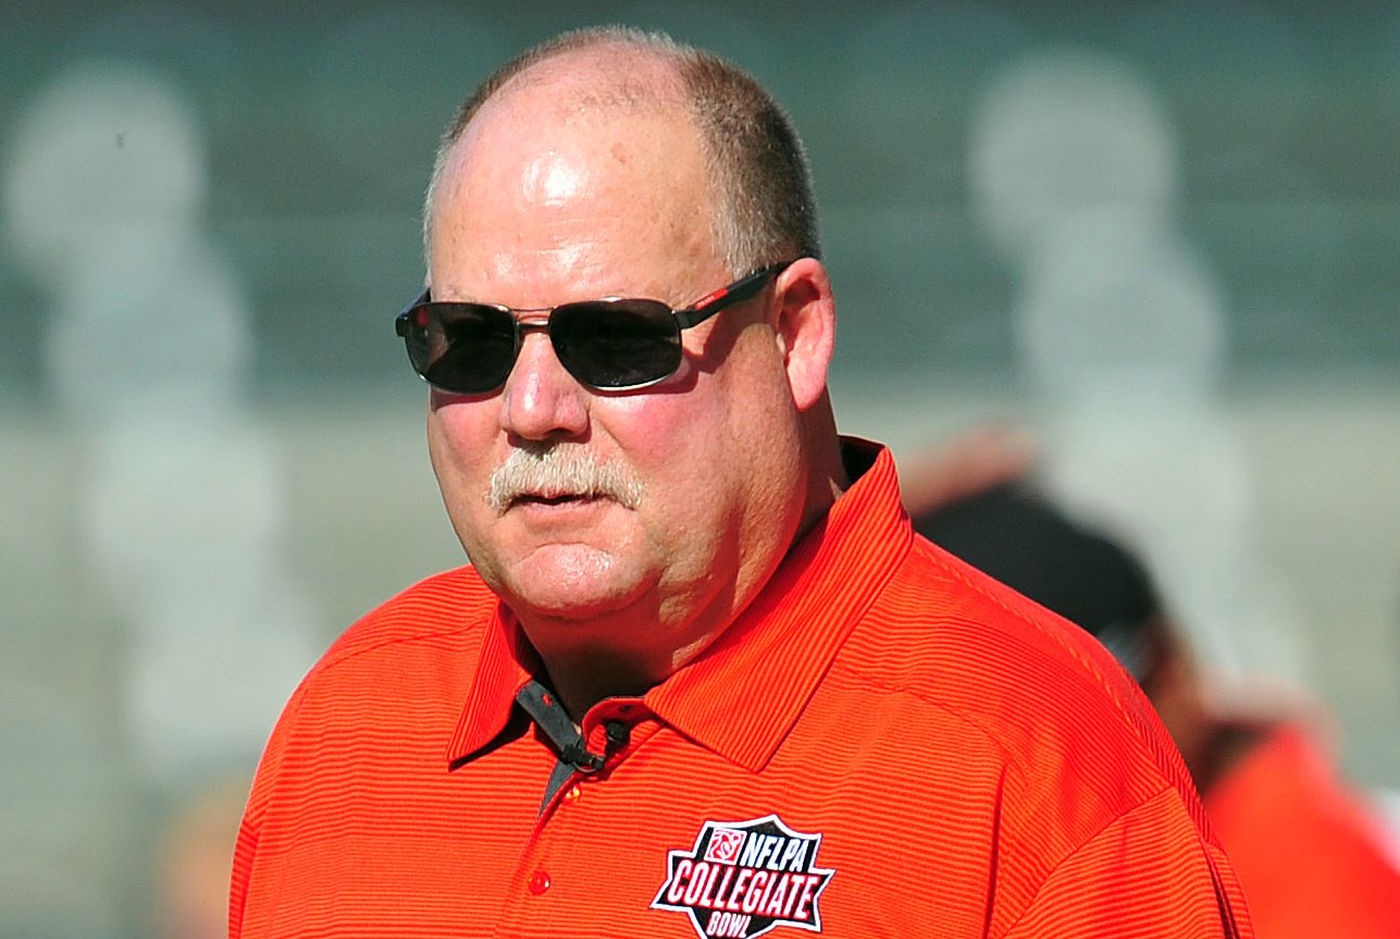 10 Unbelievable Facts About Mike Holmgren - Facts.net